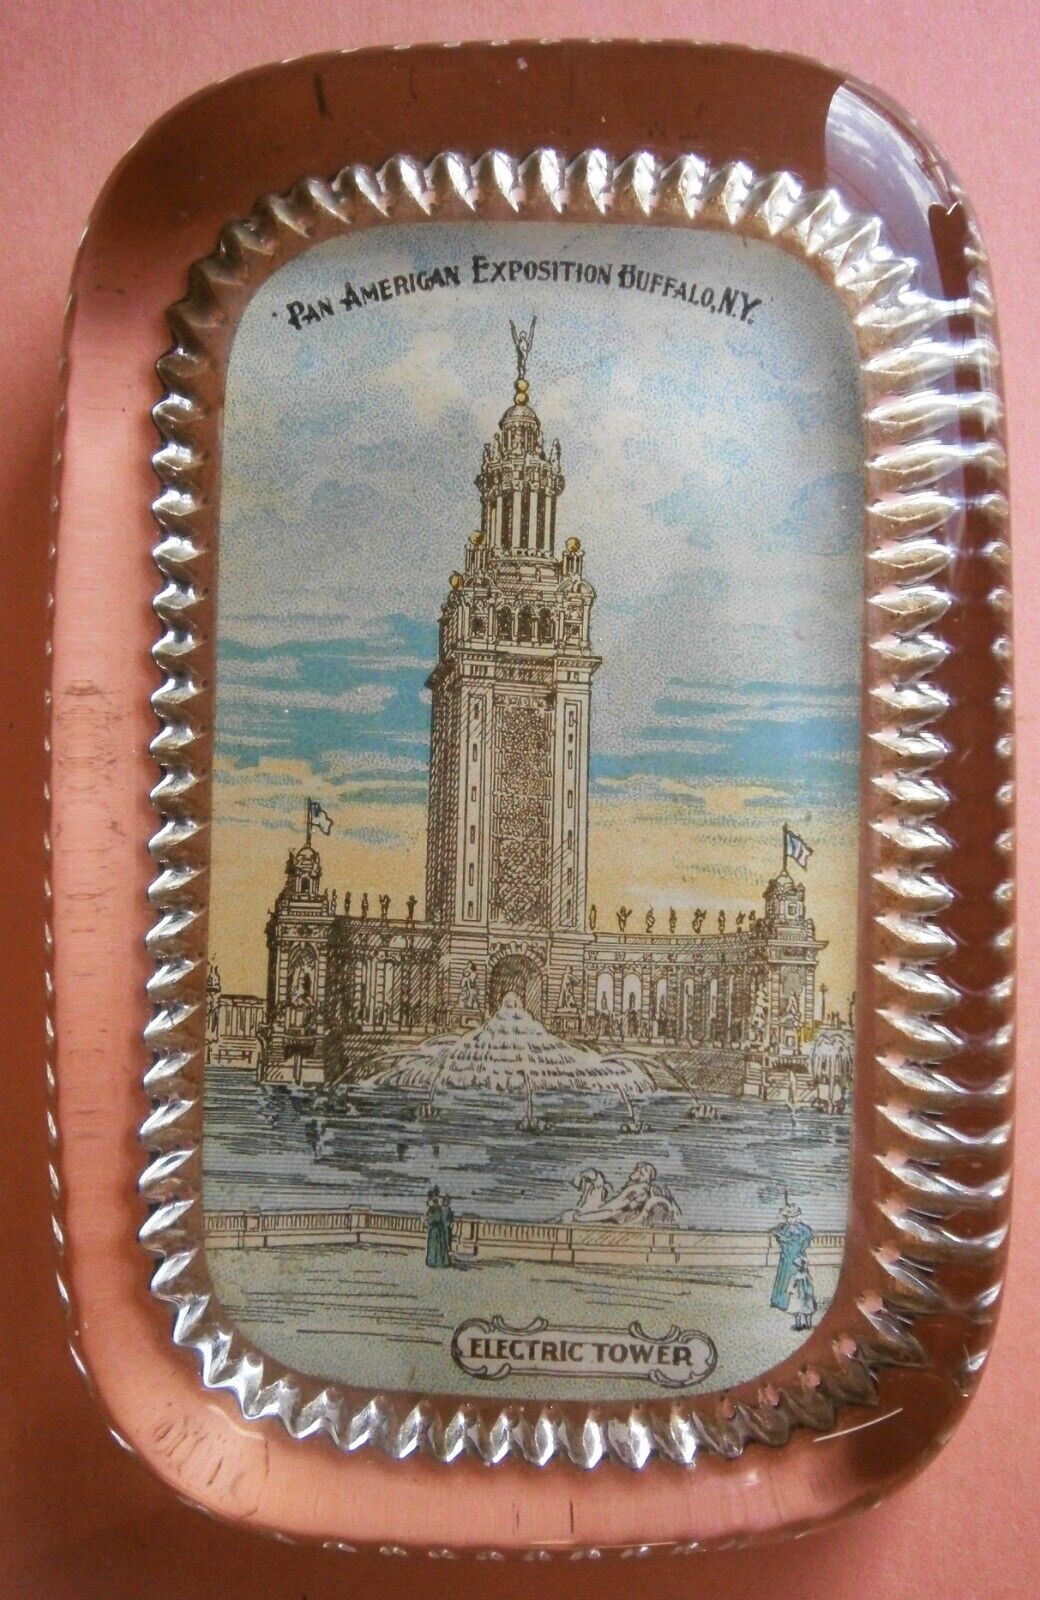 1901  Pan American Exposition Electric Tower Glass Paperweight by Empire Art Co.